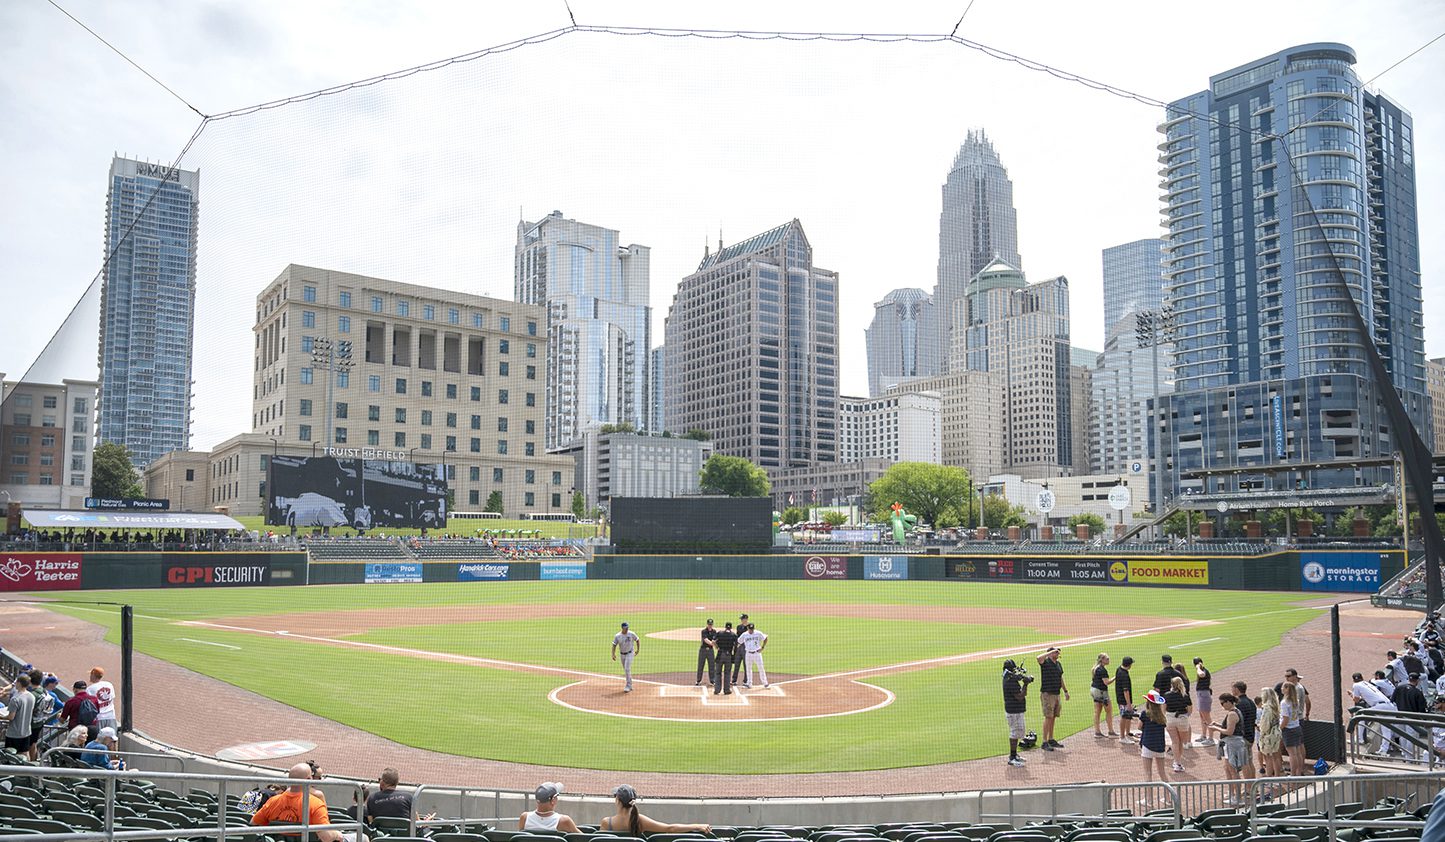 When it comes to Major League Baseball in Charlotte, if you build it will  they come?